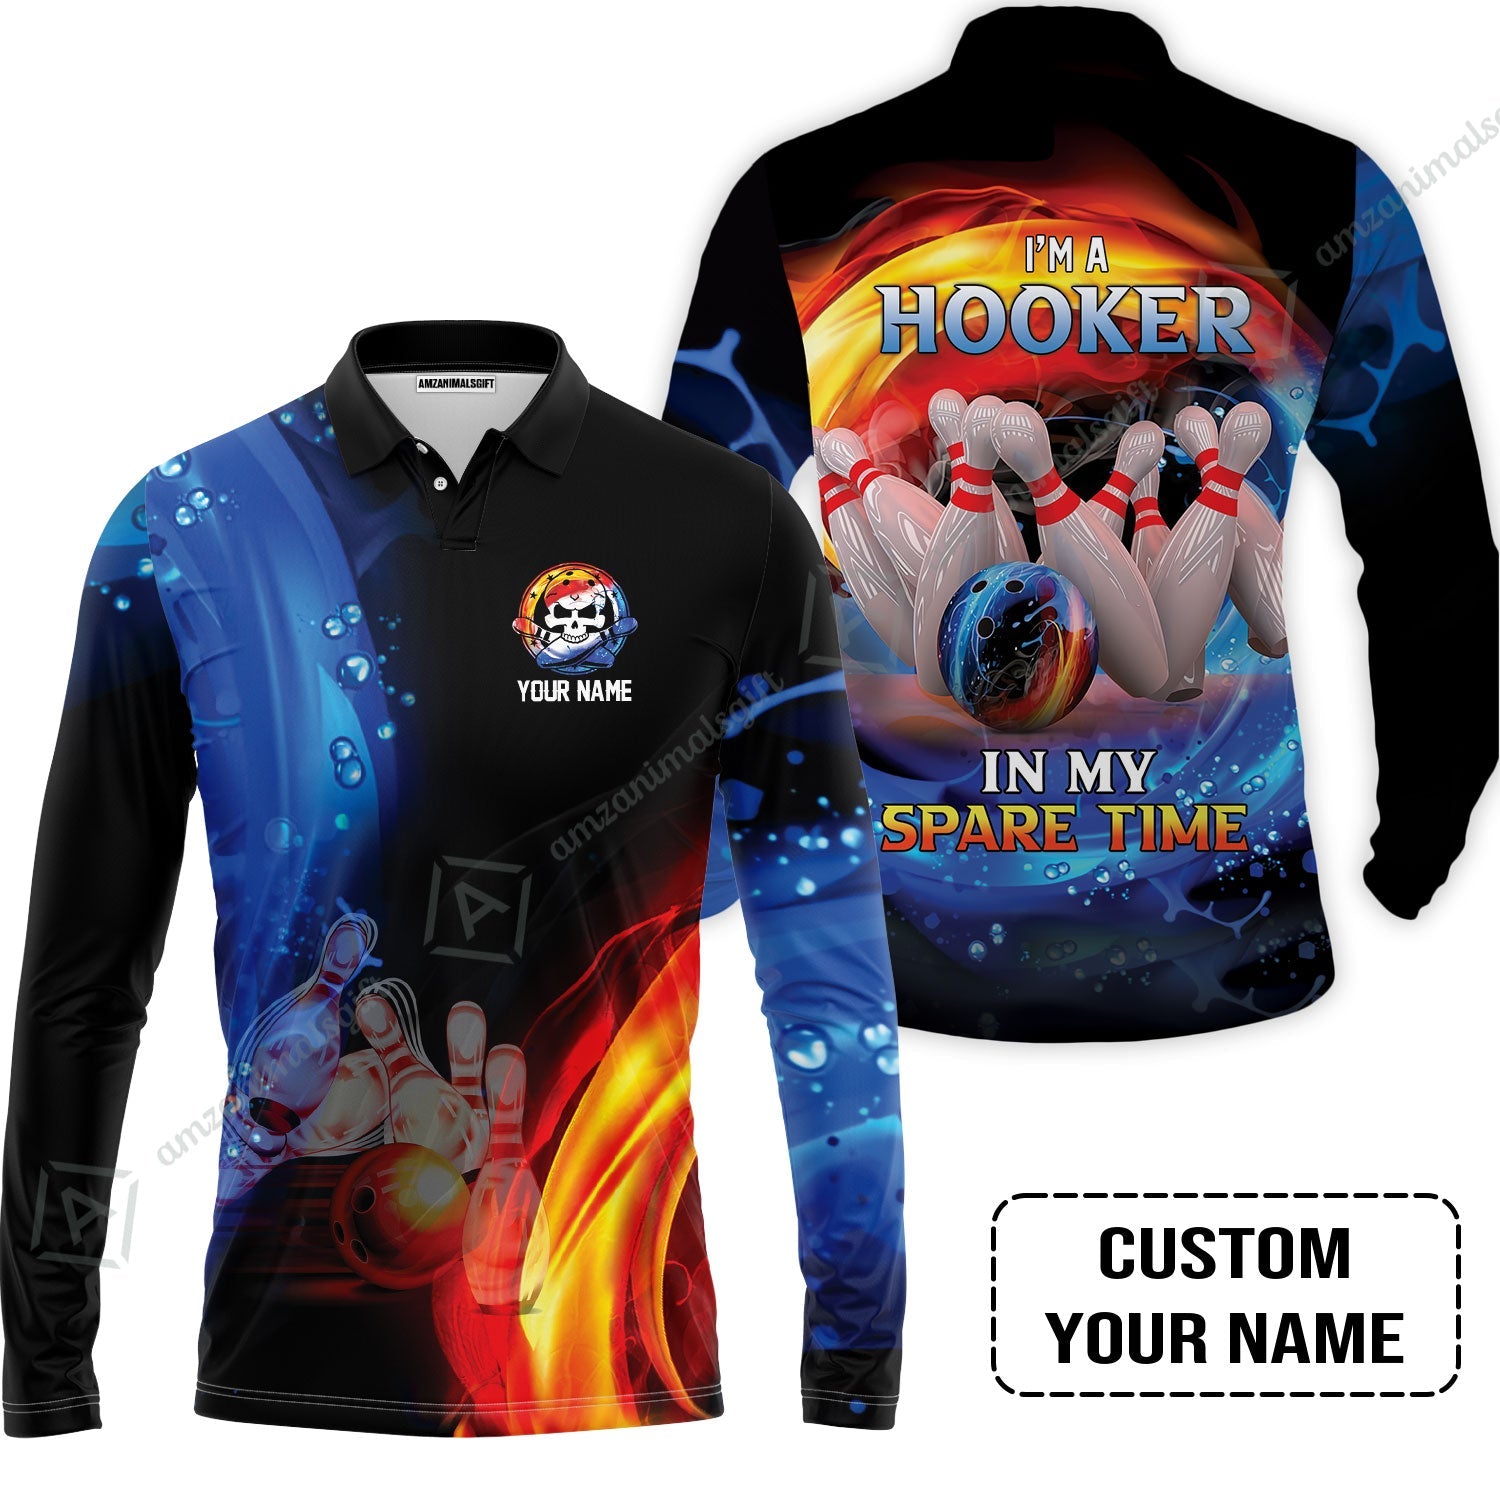 Customized Name Bowling Long Polo Shirt - Bowling I'm A Hooker In My Spare Time Personalized Long Polo Shirt